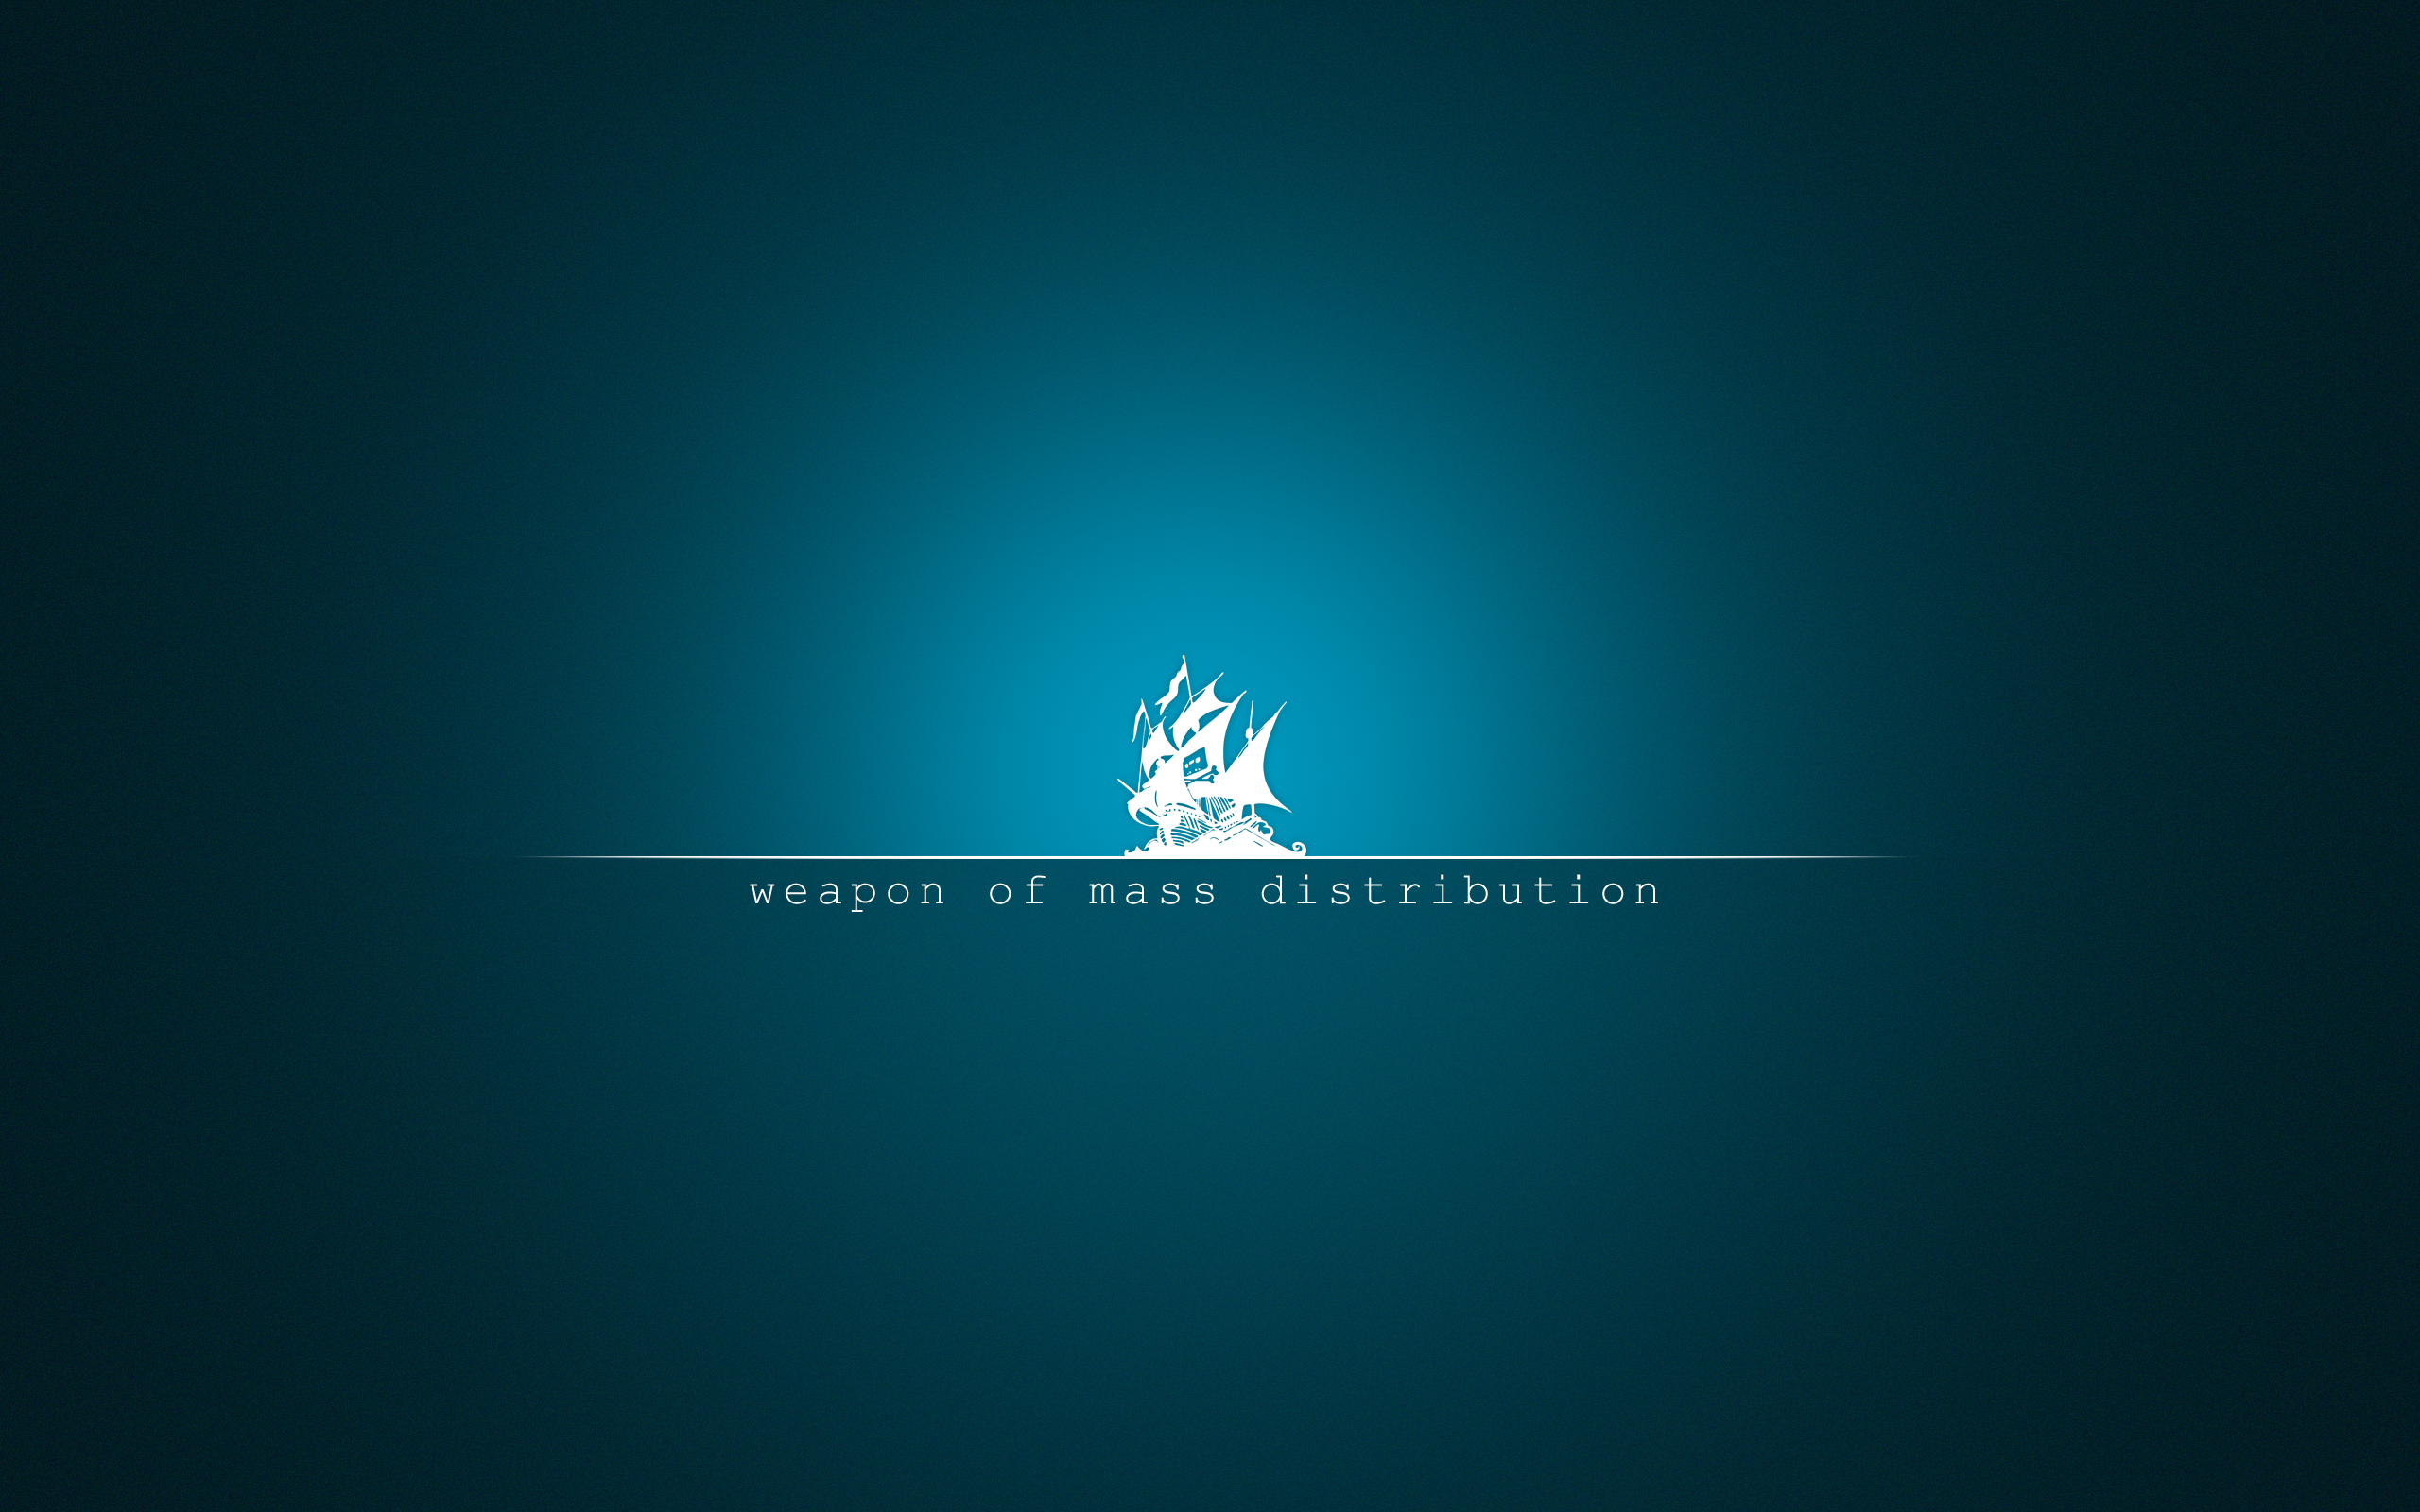 Pirate Bay. Awesome Wallpaper 1509 - The Distribution Wallpaper